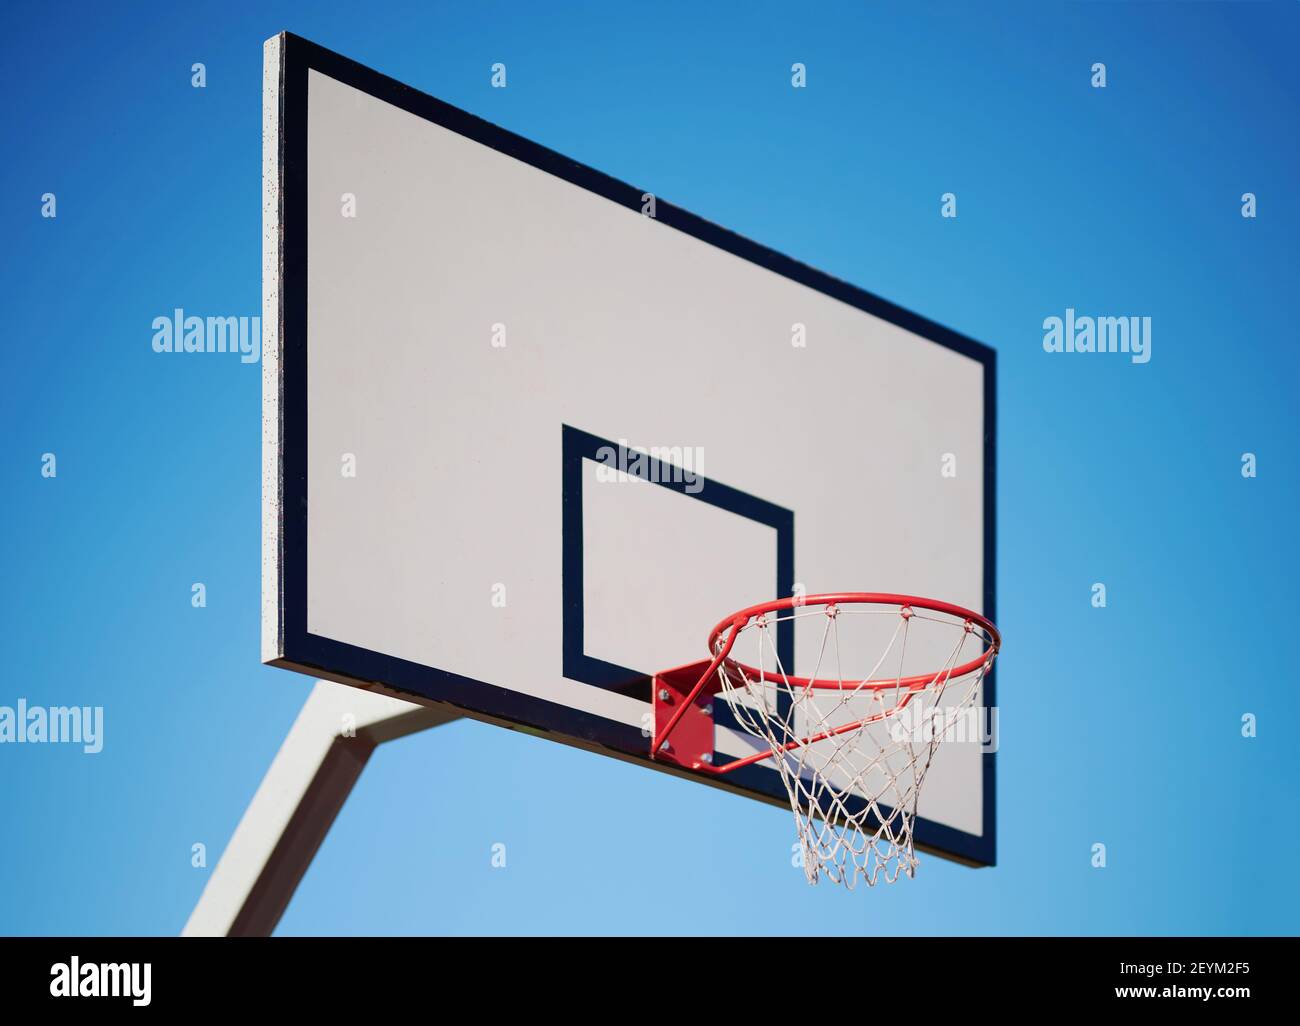 Basketball ring hoop side view on blue sky background Stock Photo